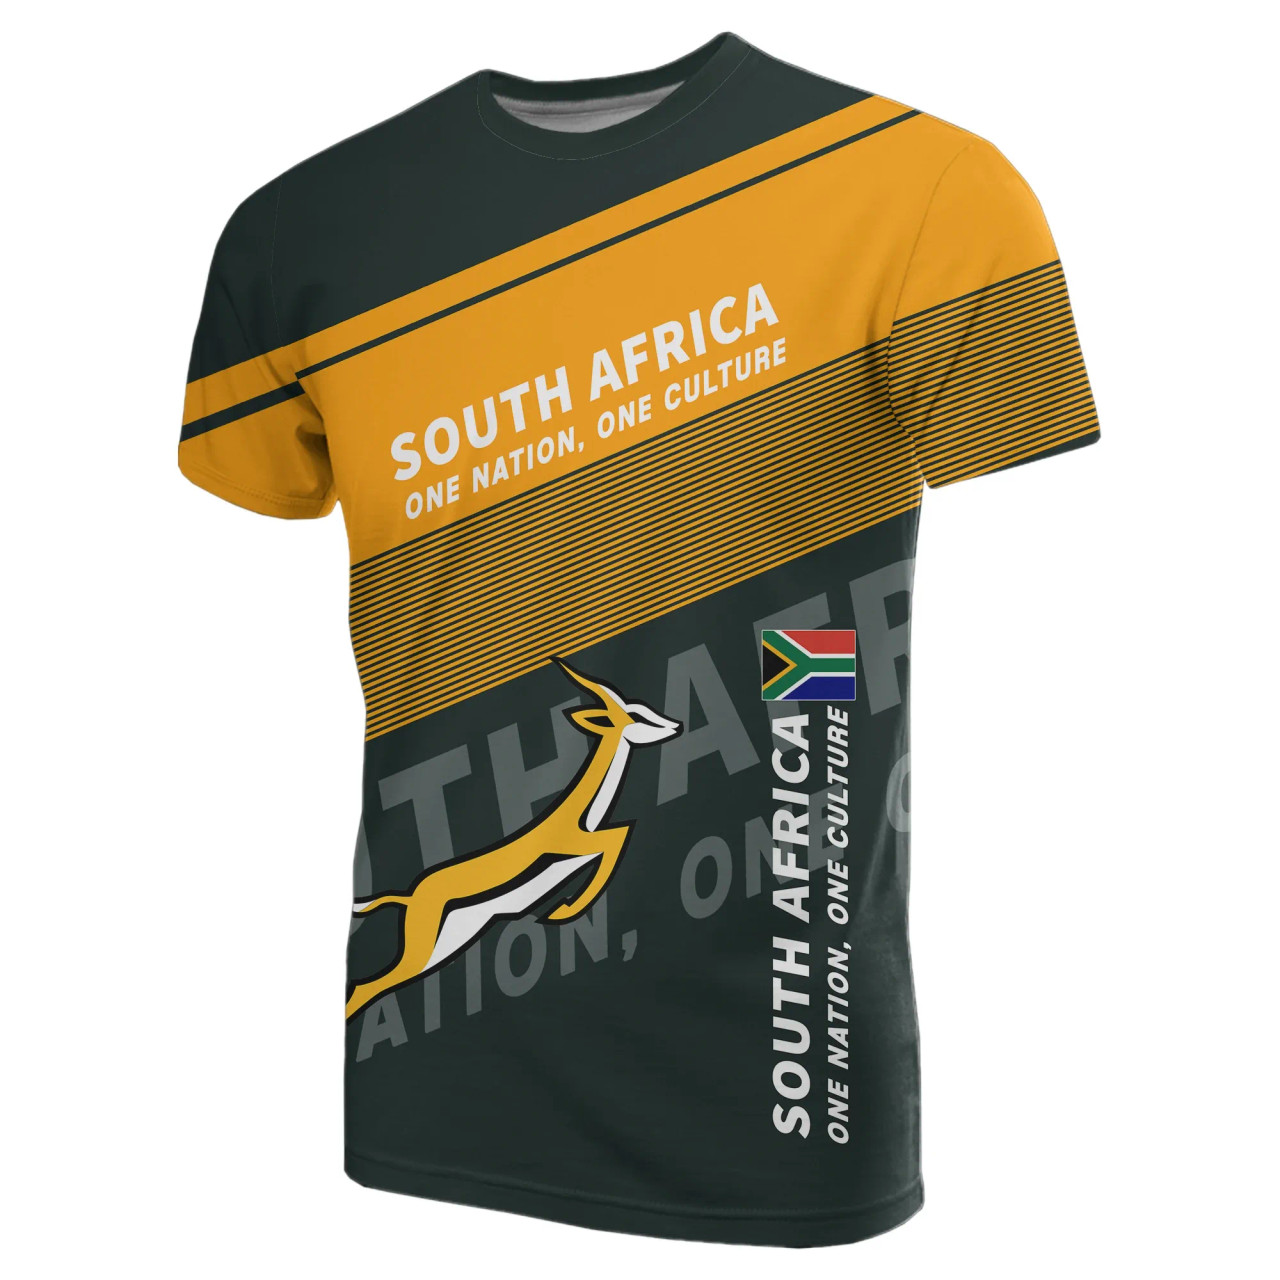 South Africa T-Shirt - Africa Limited Style T-Shirt Desert Fashion 1